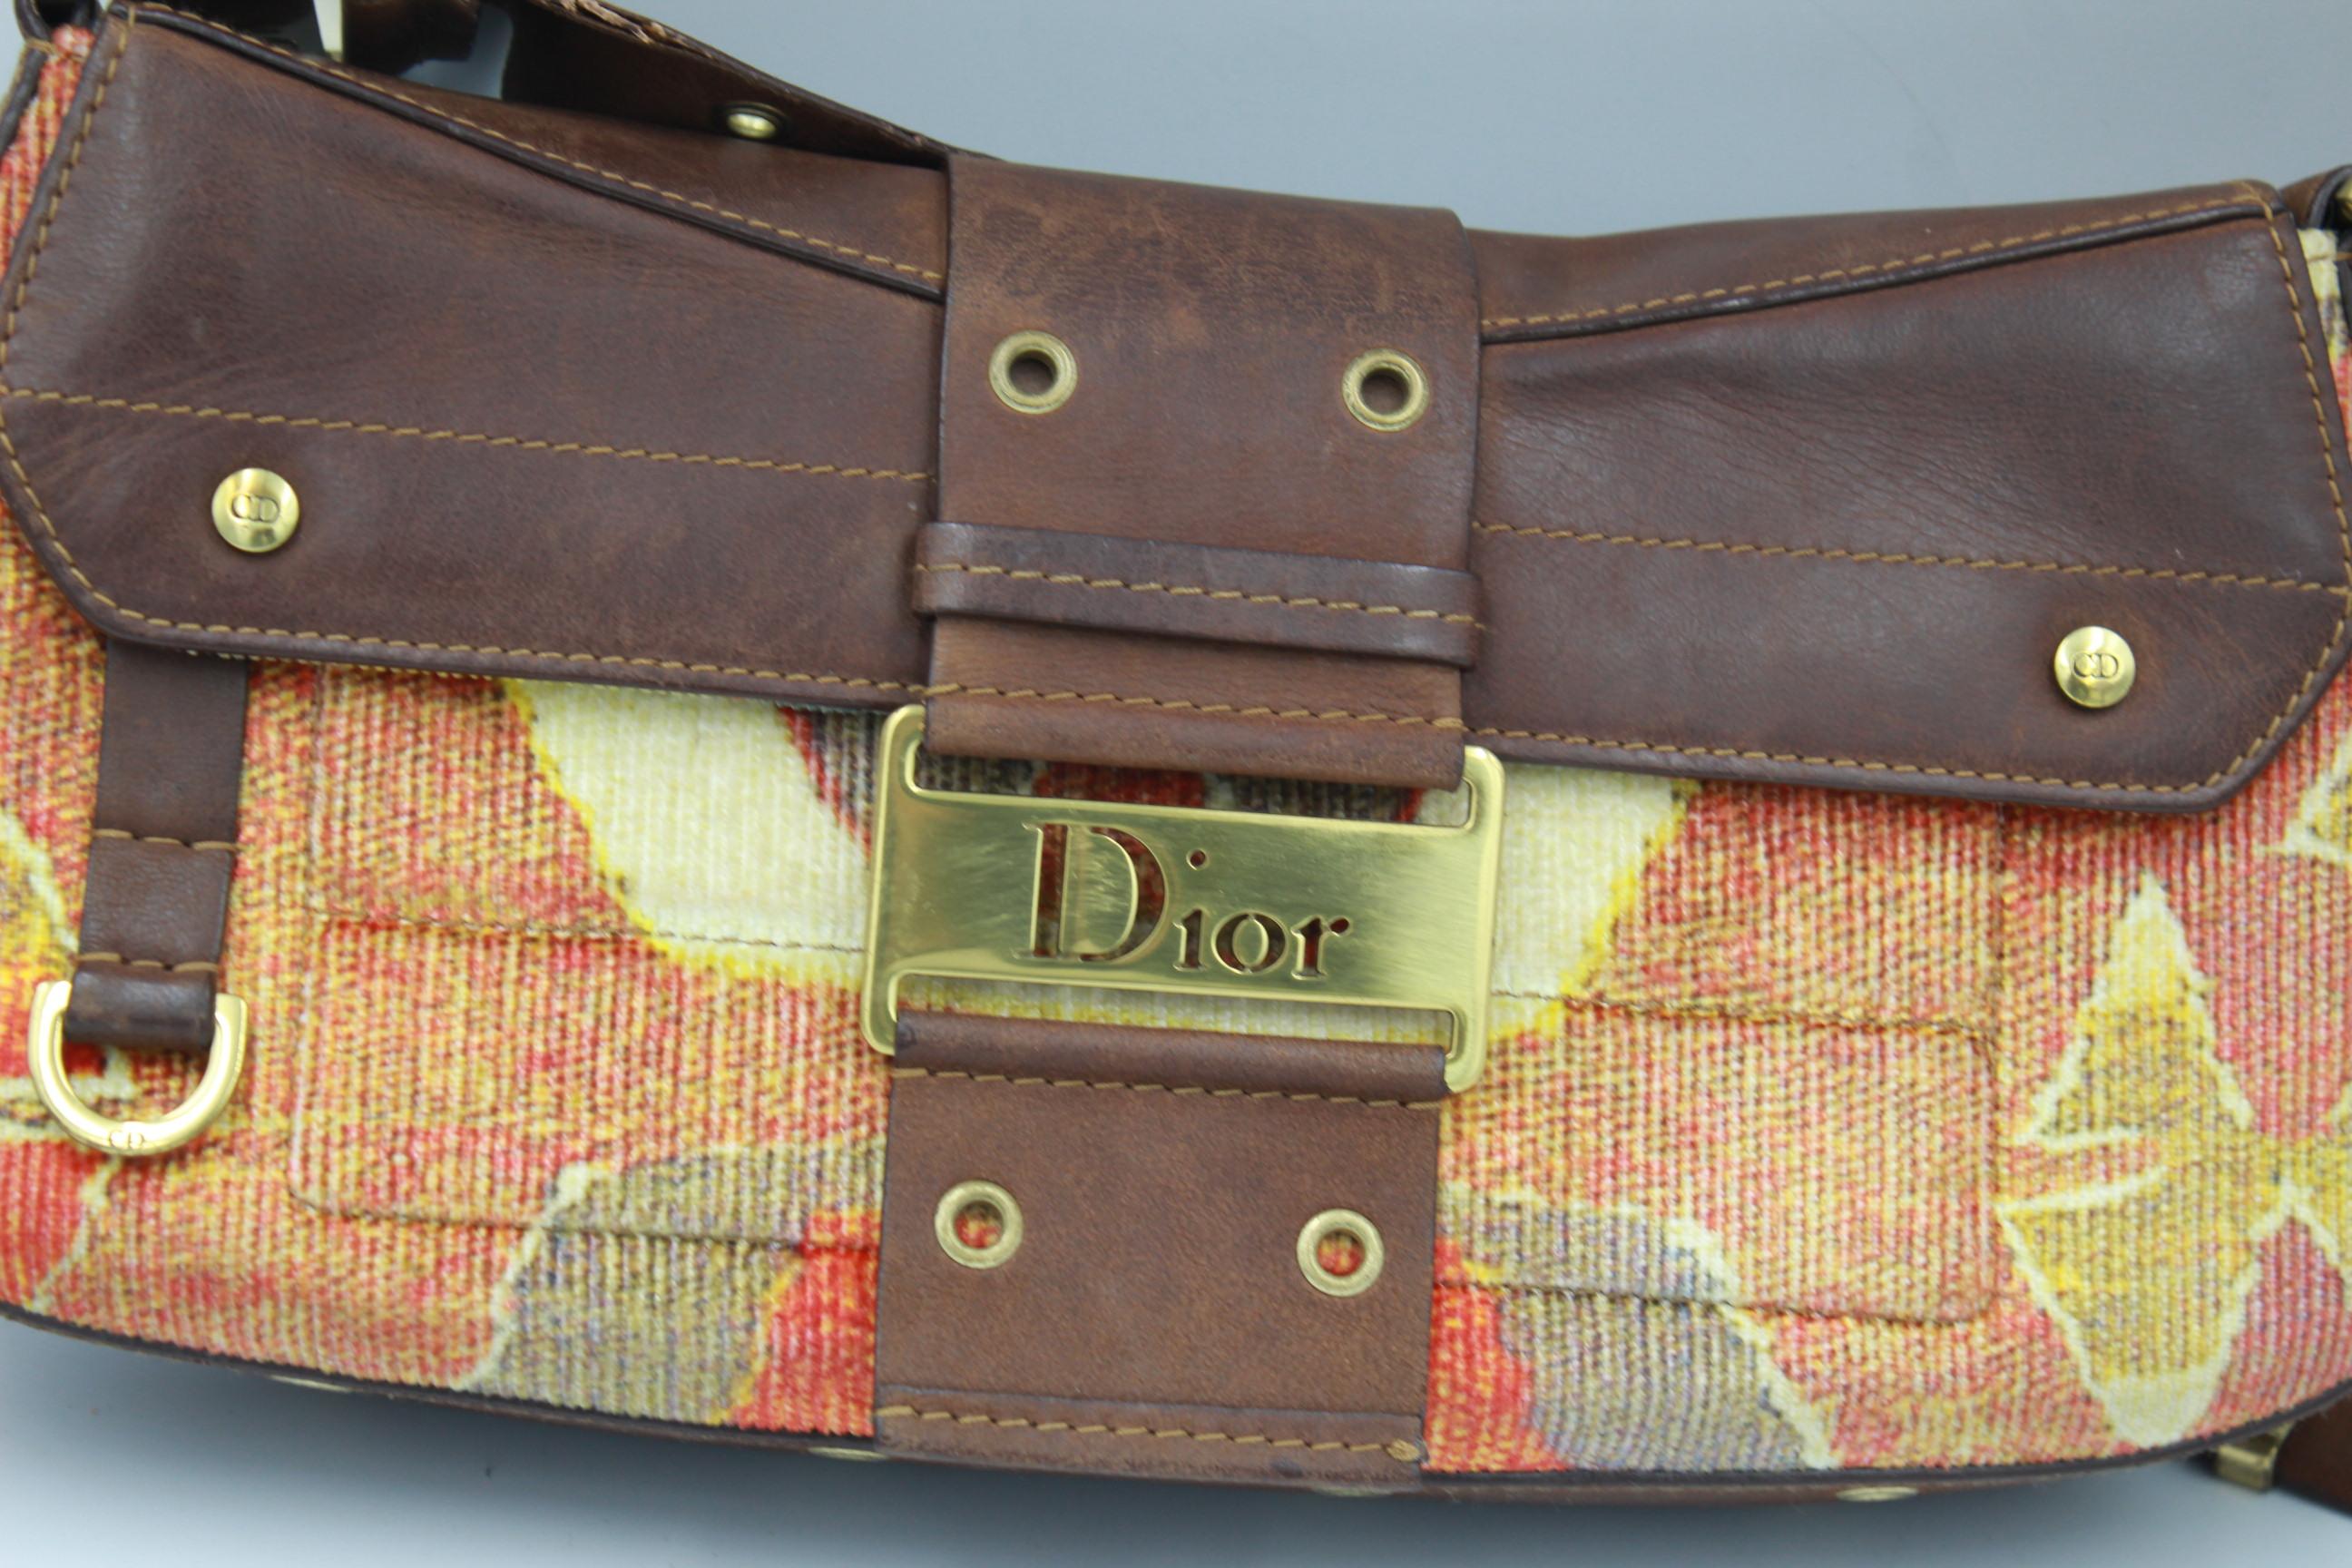 Super nice Christian Dior by Johan Galliano Handbag
Good condiiuton but leather presents some patina as its natural leather. The strap has some parts unglued ( problem quite often in this model)  
Size 30x15